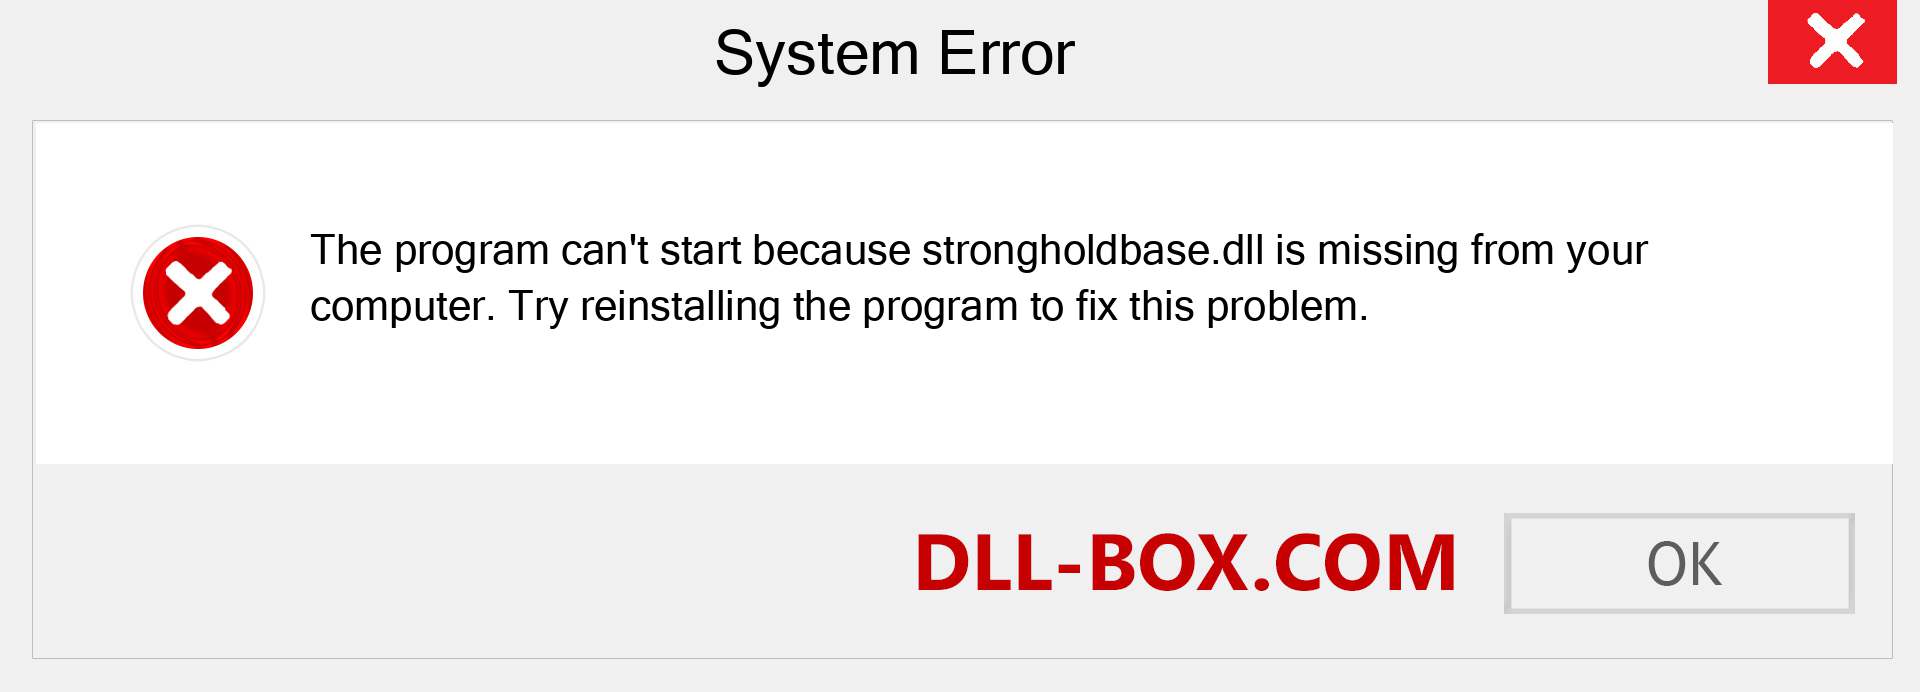  strongholdbase.dll file is missing?. Download for Windows 7, 8, 10 - Fix  strongholdbase dll Missing Error on Windows, photos, images